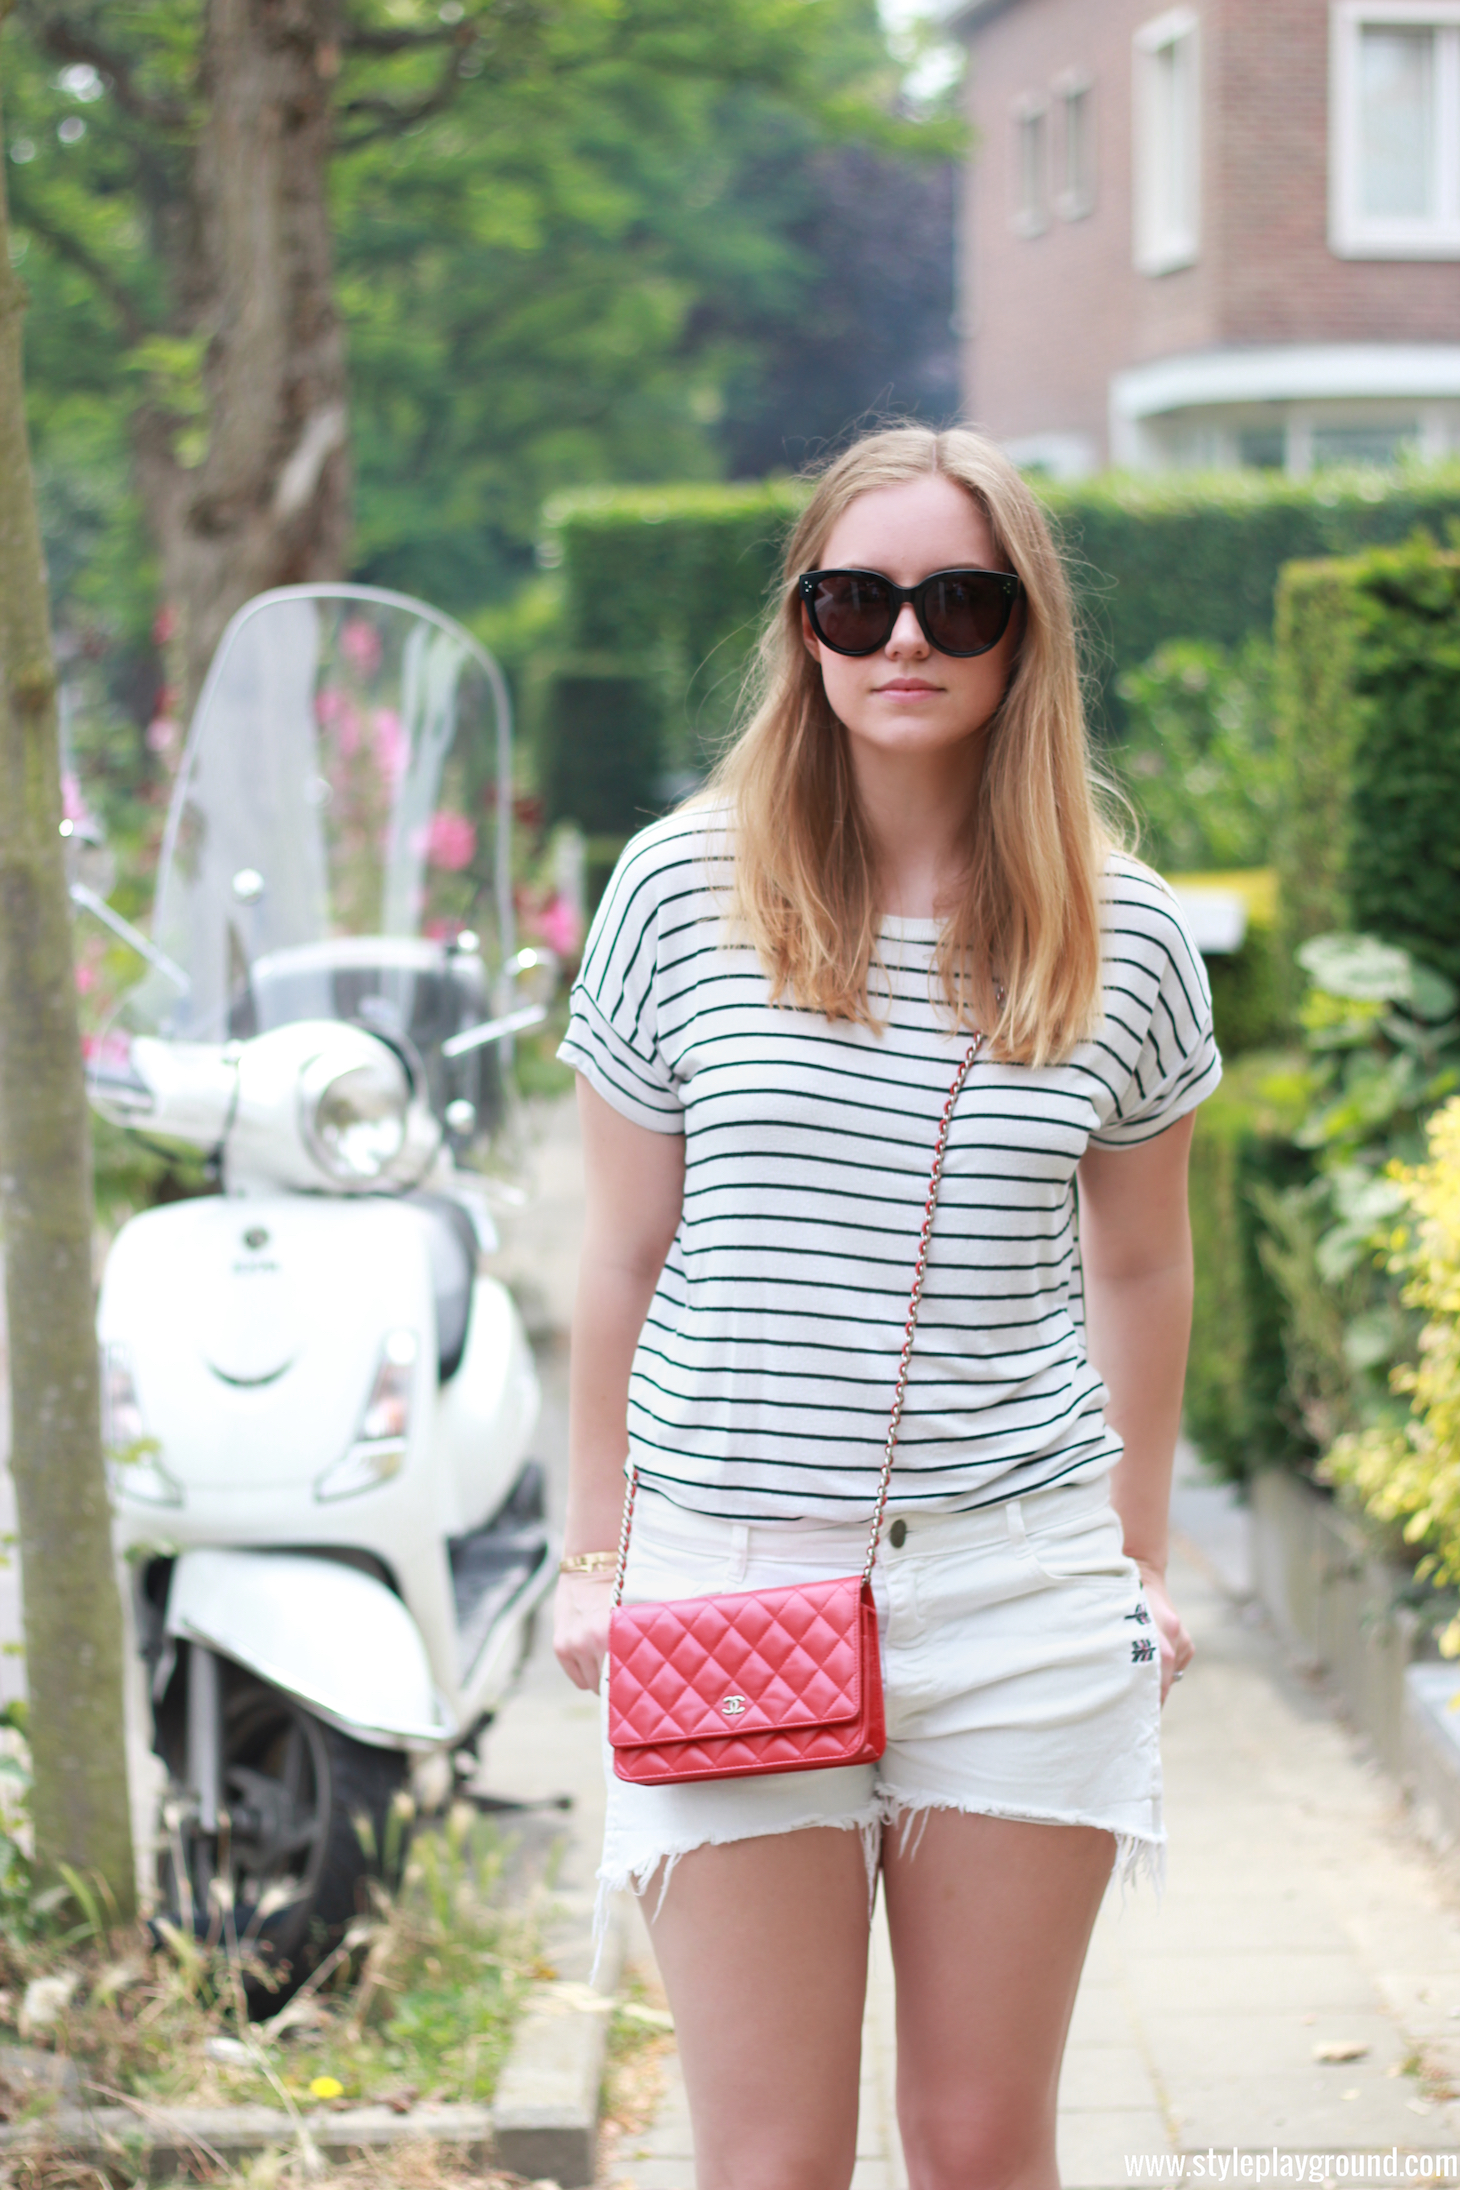 Axelle Blanpain from Style playground is wearing Zara shorts & t-shirt, white Converse sneakers, Chanel red WOC, Celine Audrey sunglasses